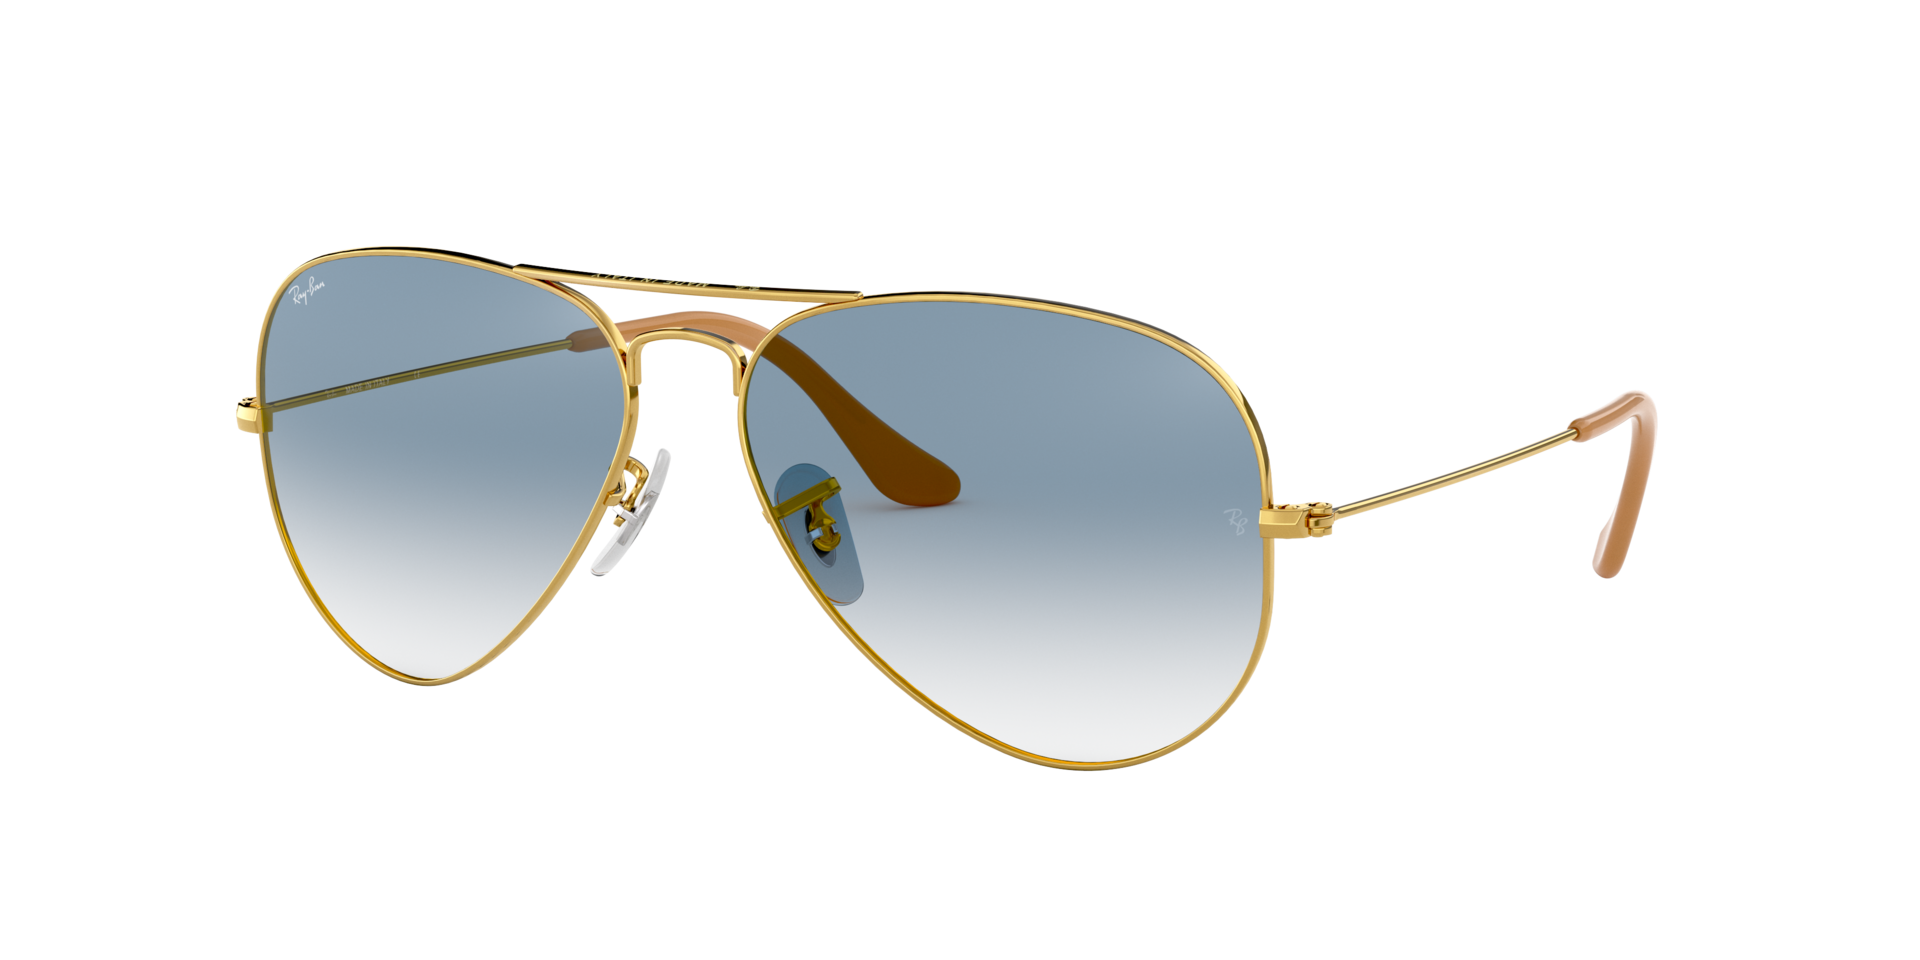 Ray-Ban Aviator Large Metal Sonnenbrille RB3025 001/3F 55